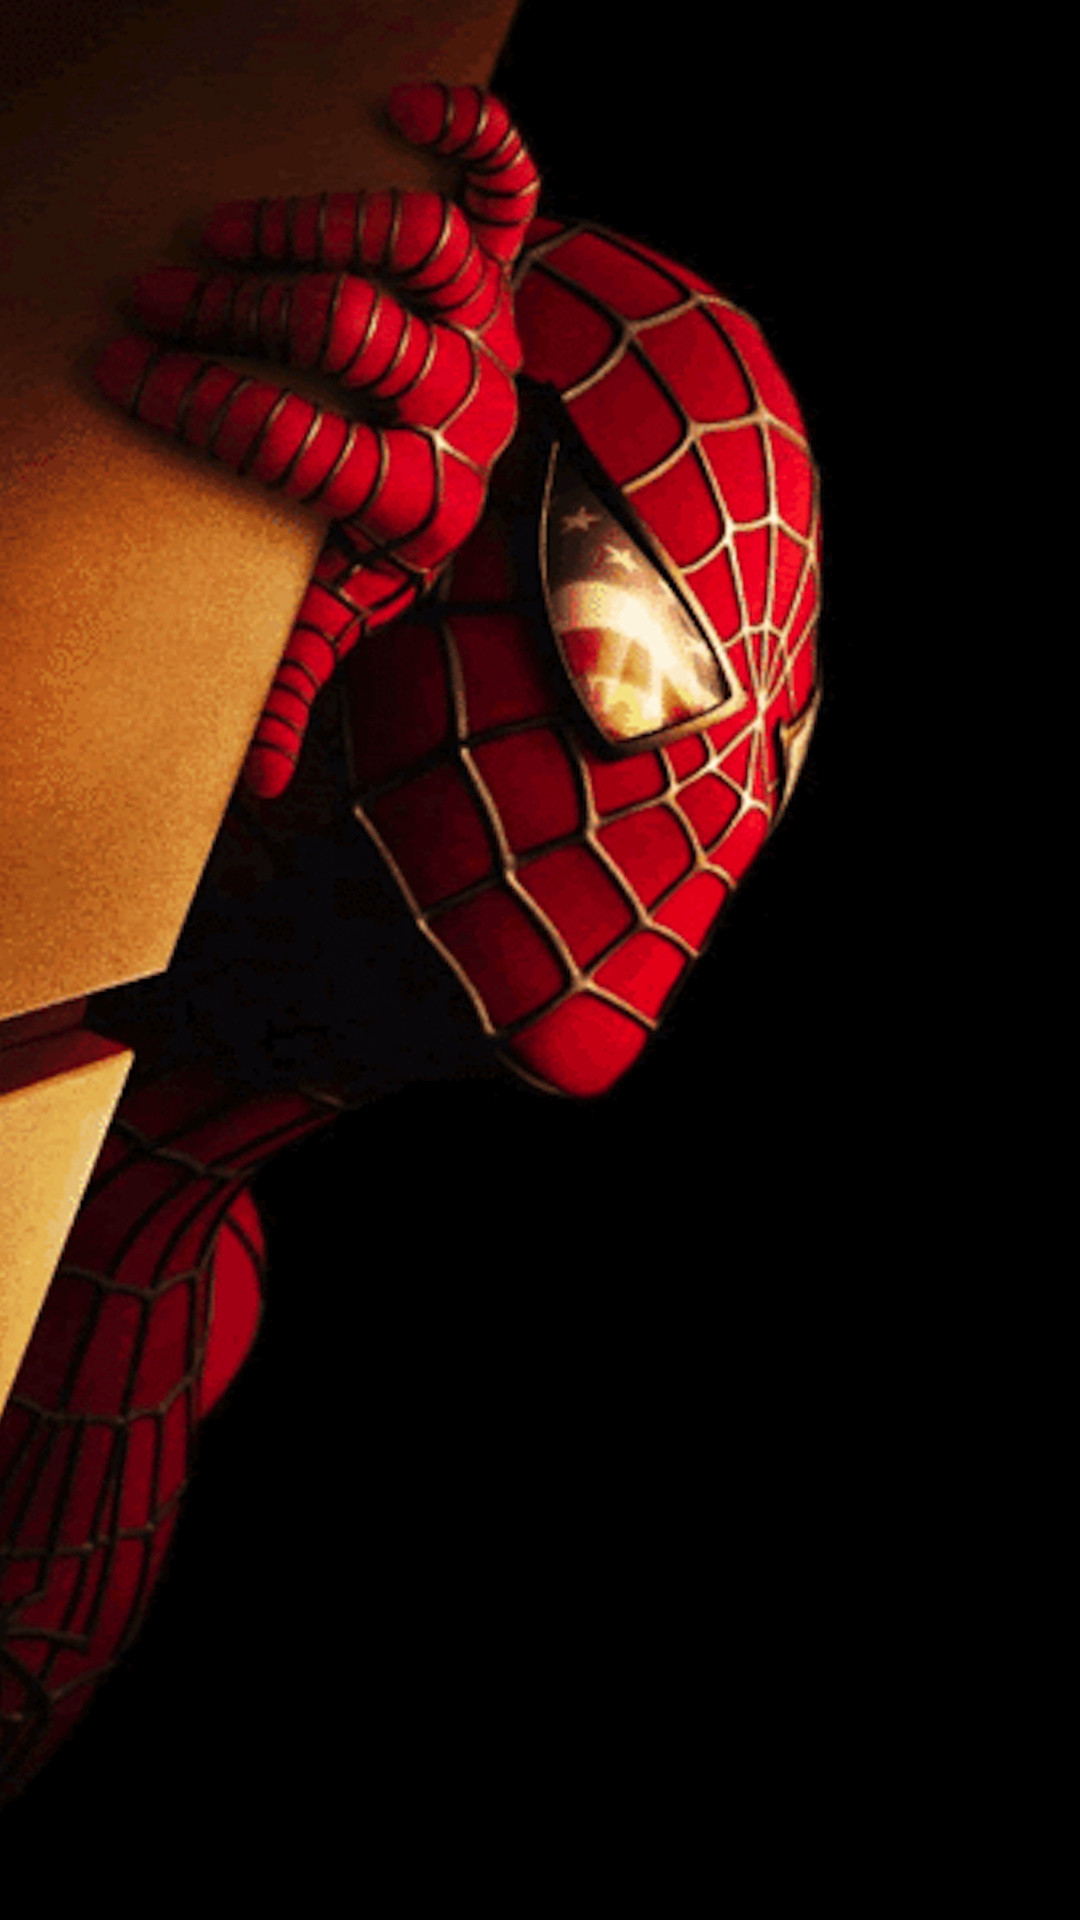 1080p Images: Mobile Spiderman Hd Wallpaper For Android